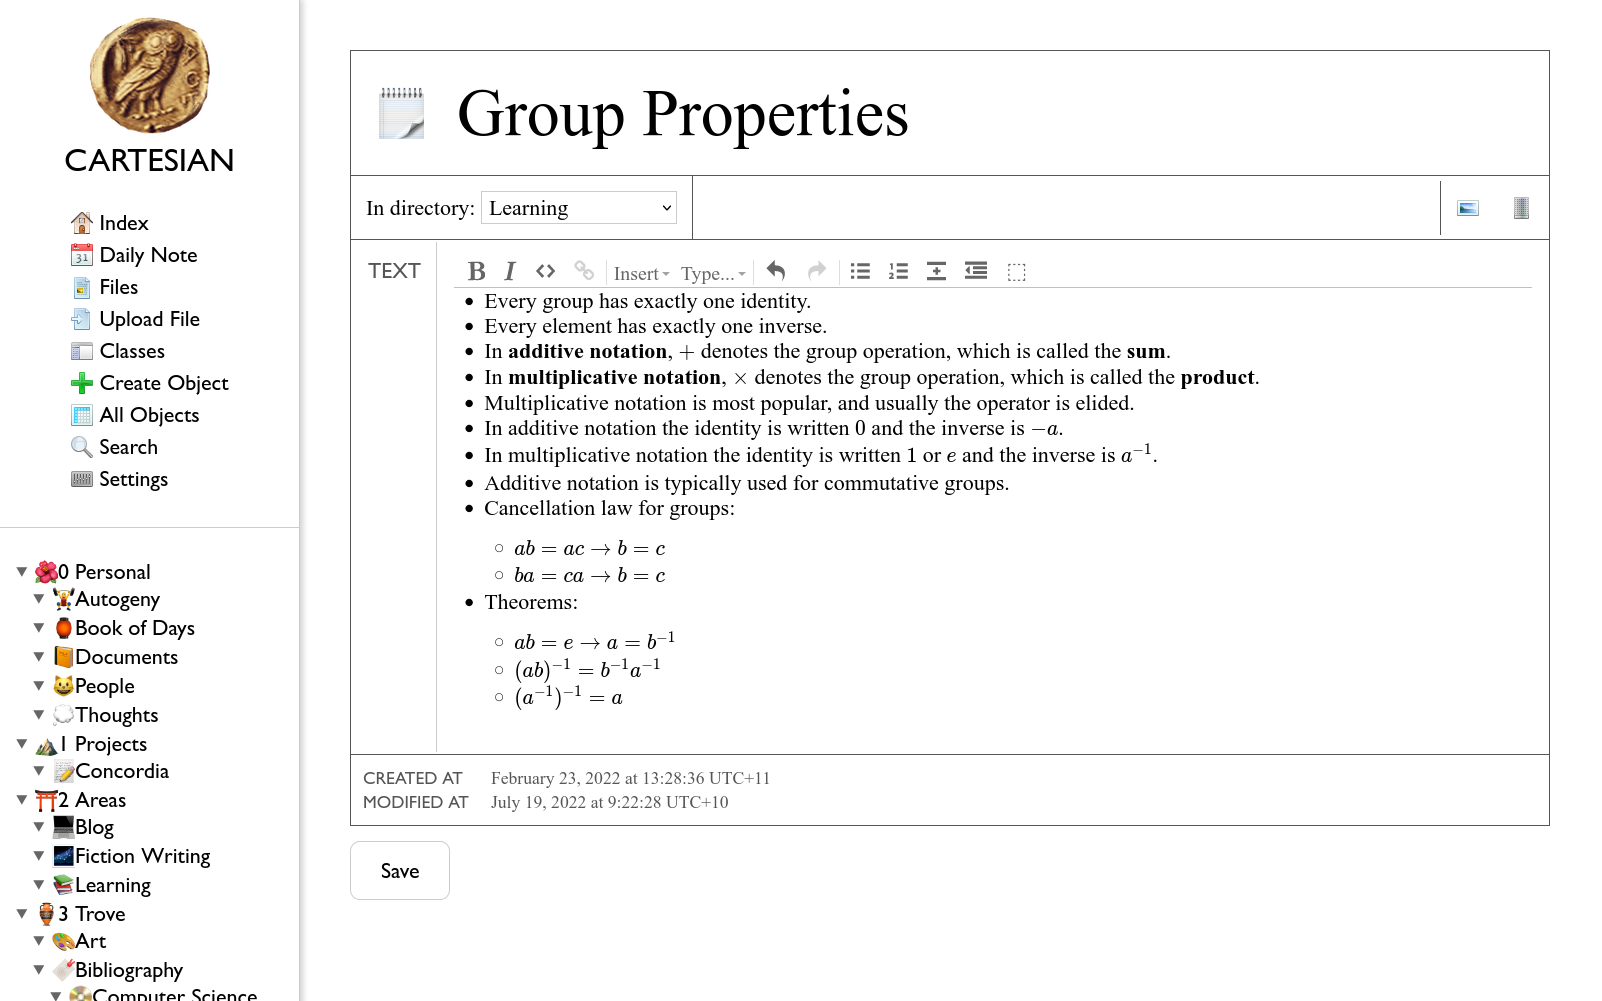 A screenshot of my personal wiki, showing notes on group theory.